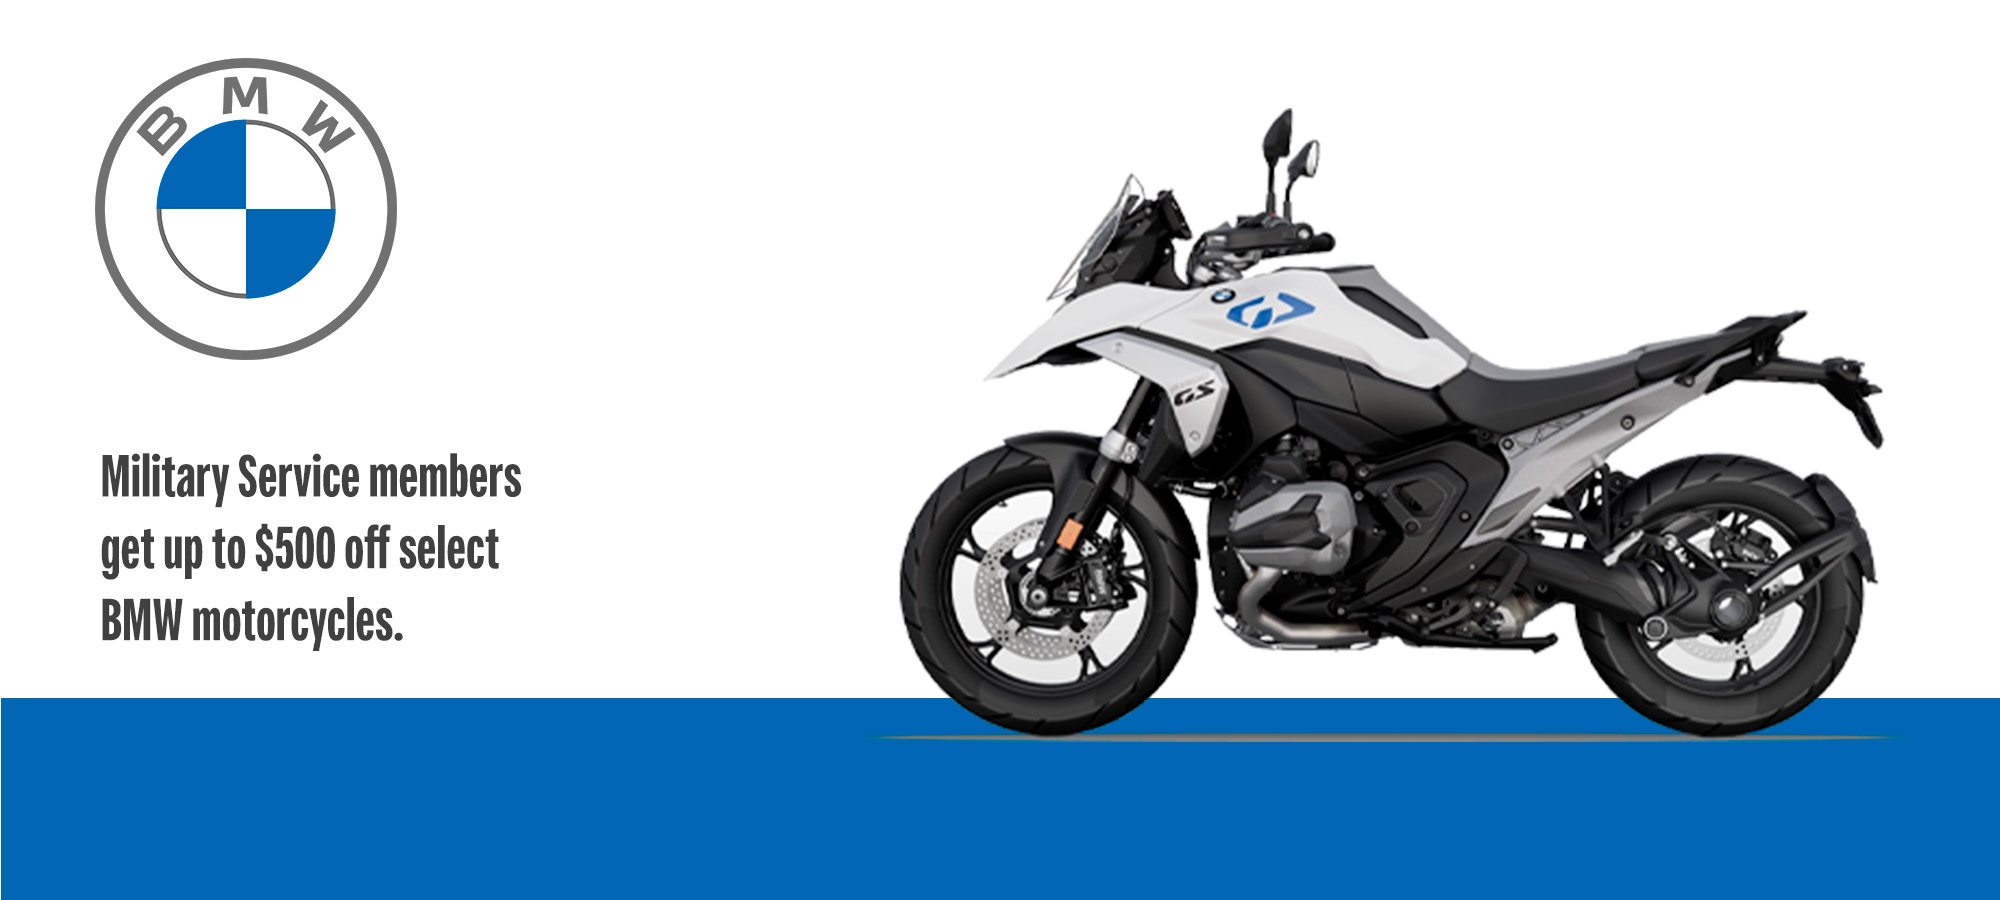 BMW US - Military Service members get up to $500 off select BMW motorcycles. at Lynnwood Motoplex, Lynnwood, WA 98037